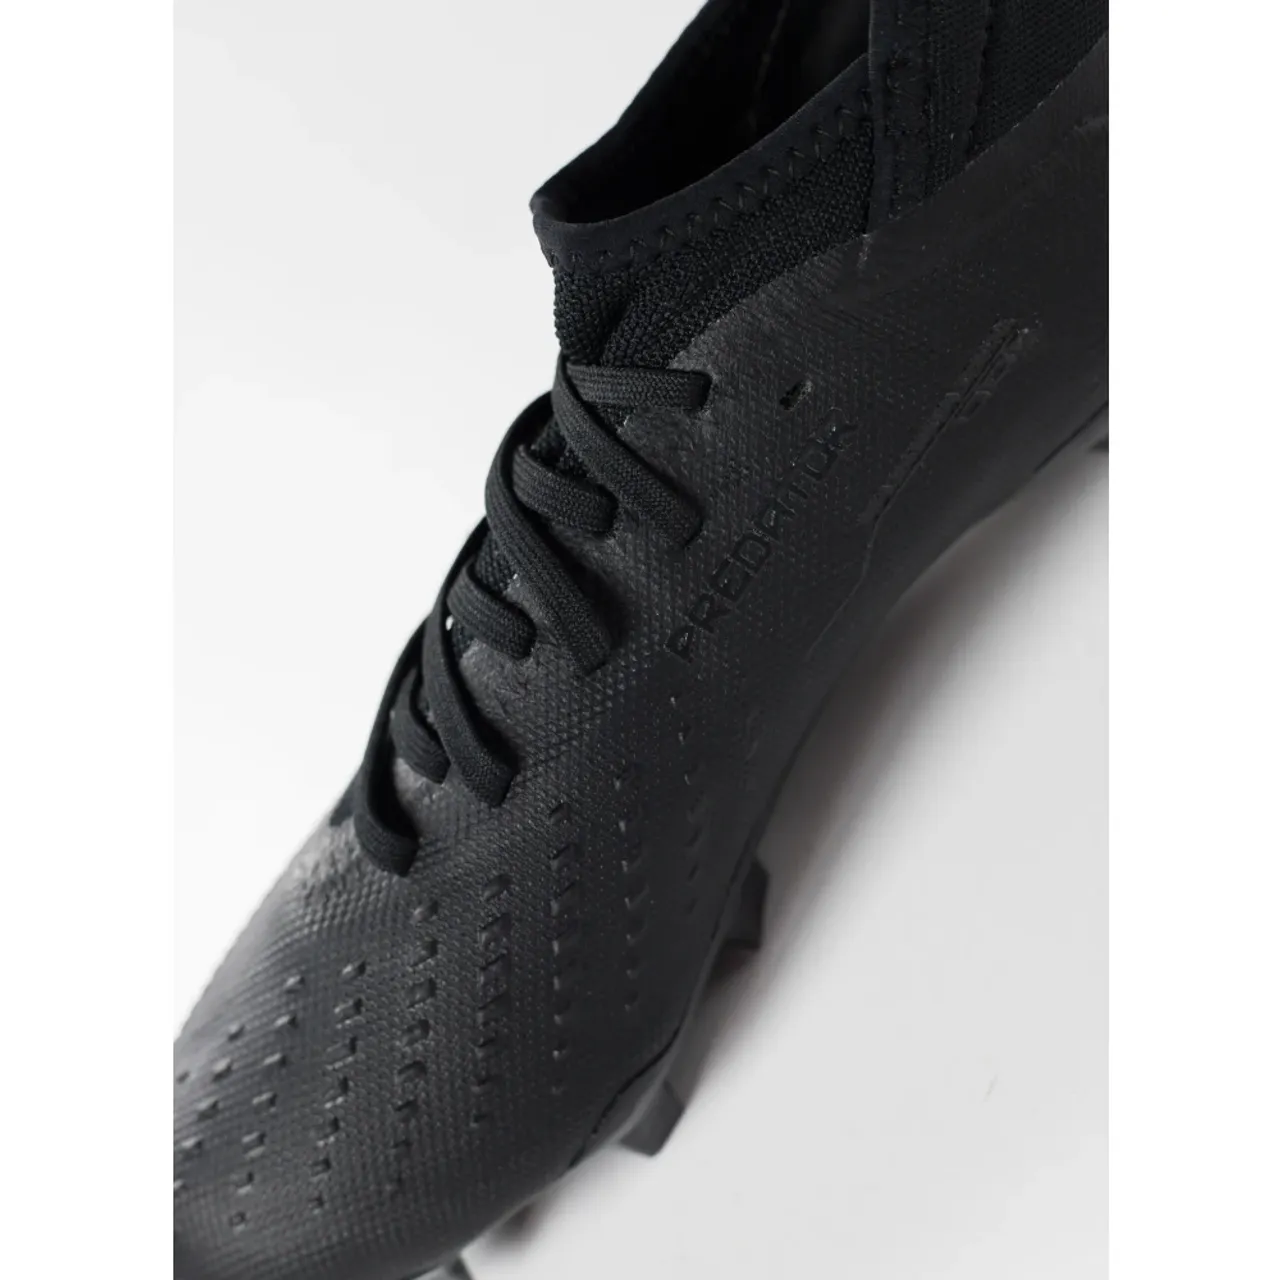 Adidas , Soccer Shoes with High Definition Texture ,Black male, Sizes: